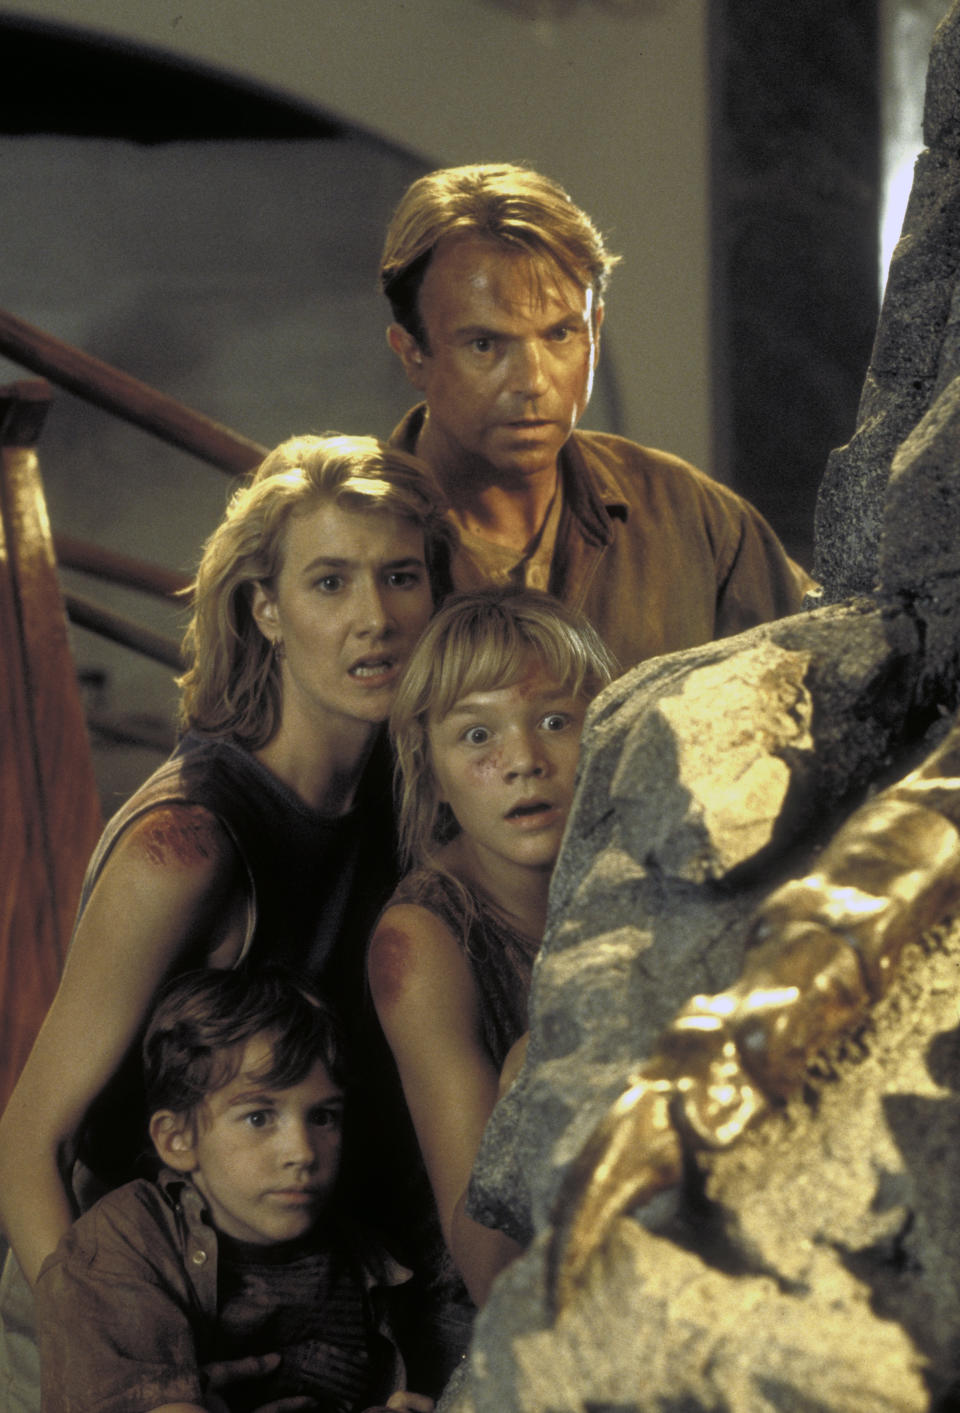 Actor Sam Neill as Dr. Alan Grant and actress Laura Dern as Dr. Ellie Sattler, with Ariana Richards (right) and Joseph Mazzello (left) as Lex and Tim, in a scene from the film 'Jurassic Park', 1993.  (Photo by Murray Close/Getty Images)